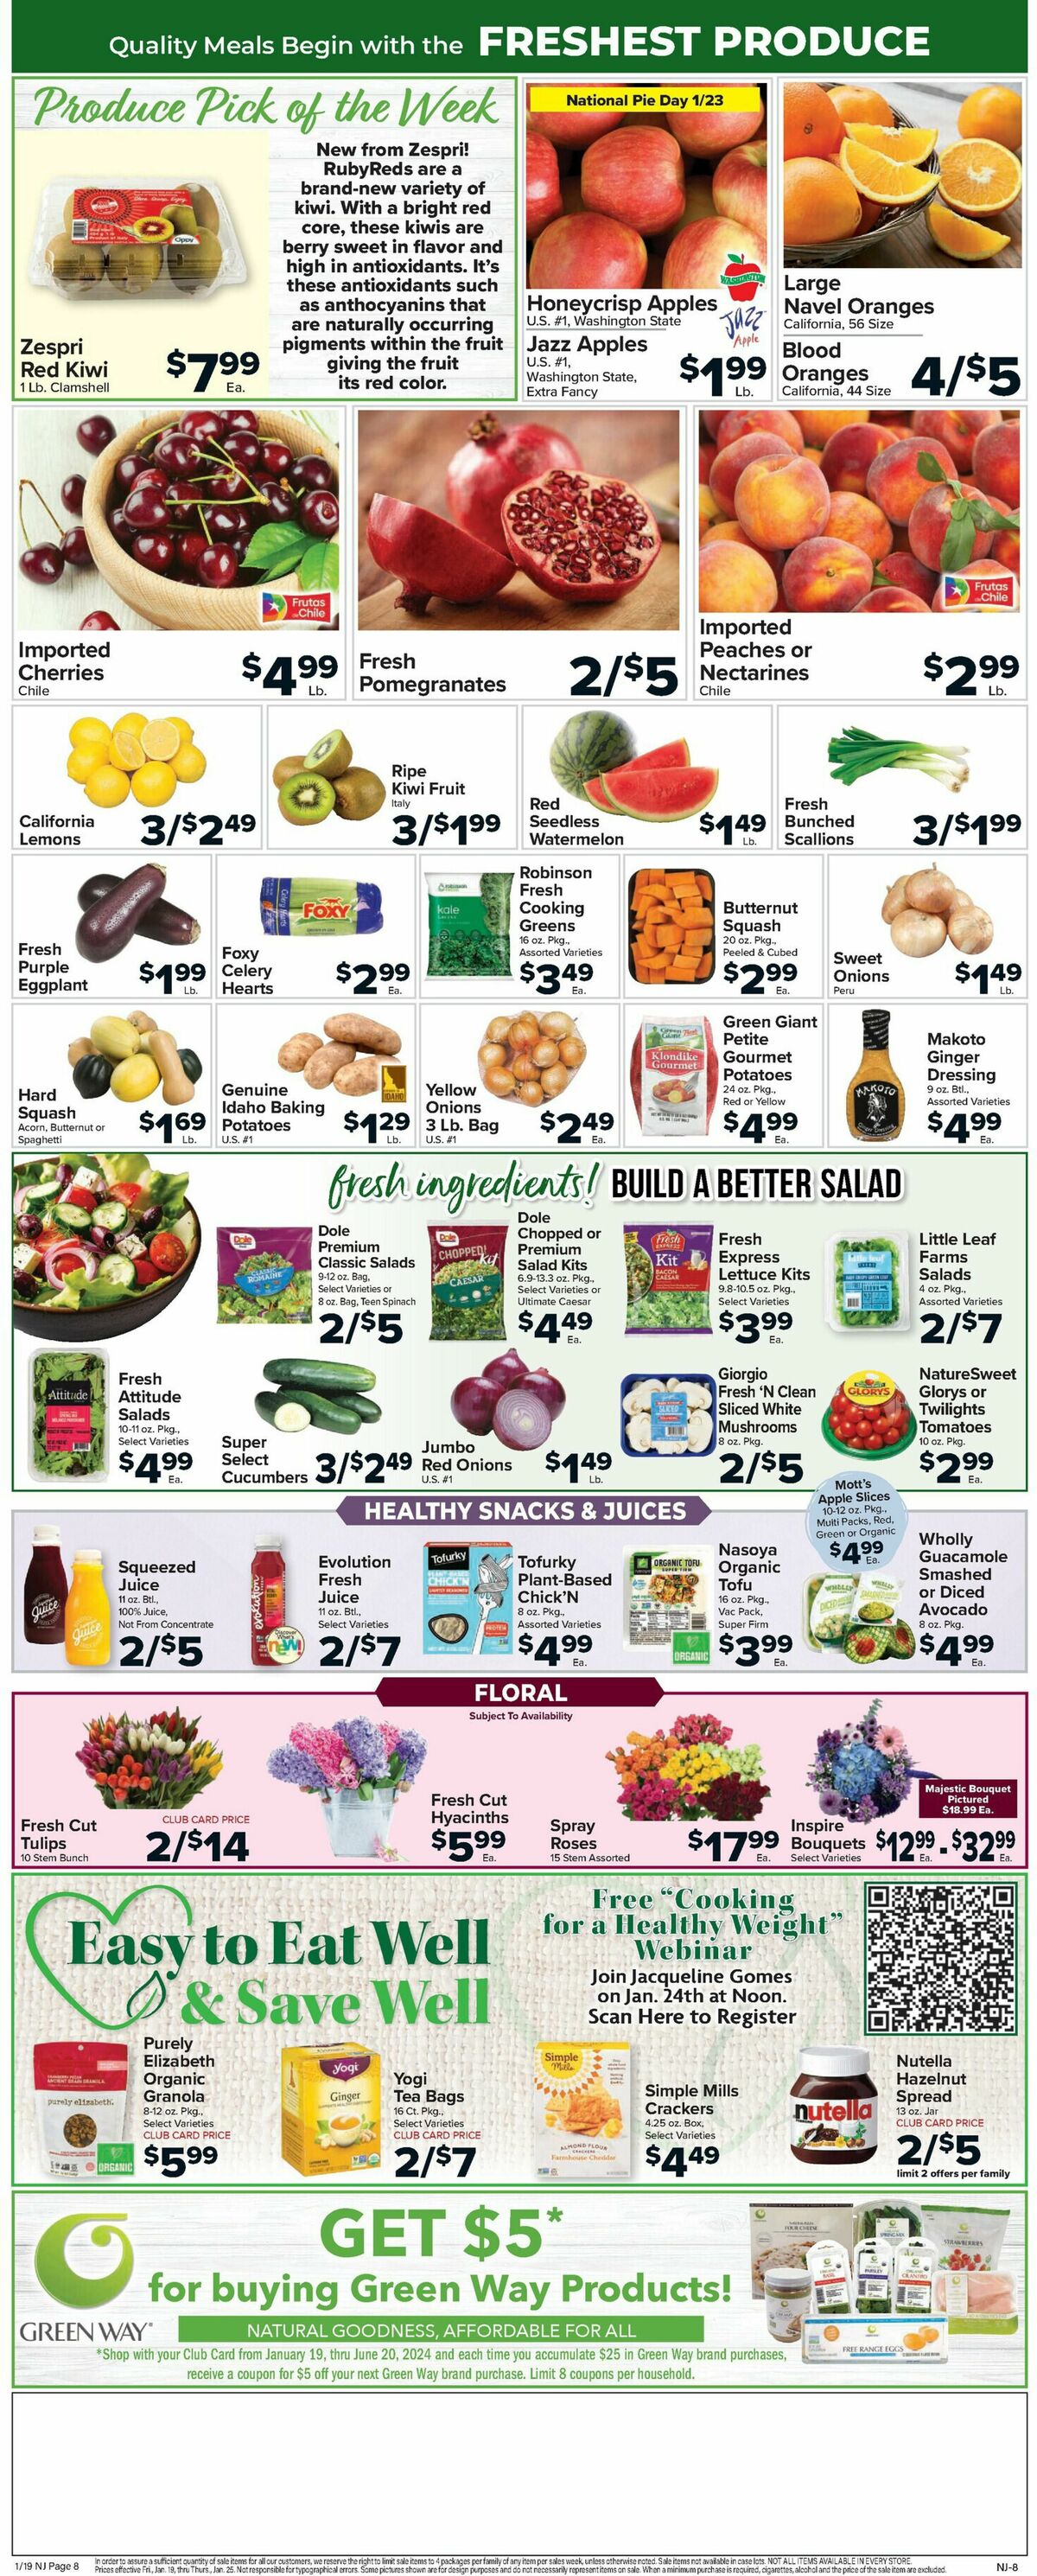 Food Town Weekly Ad from January 19